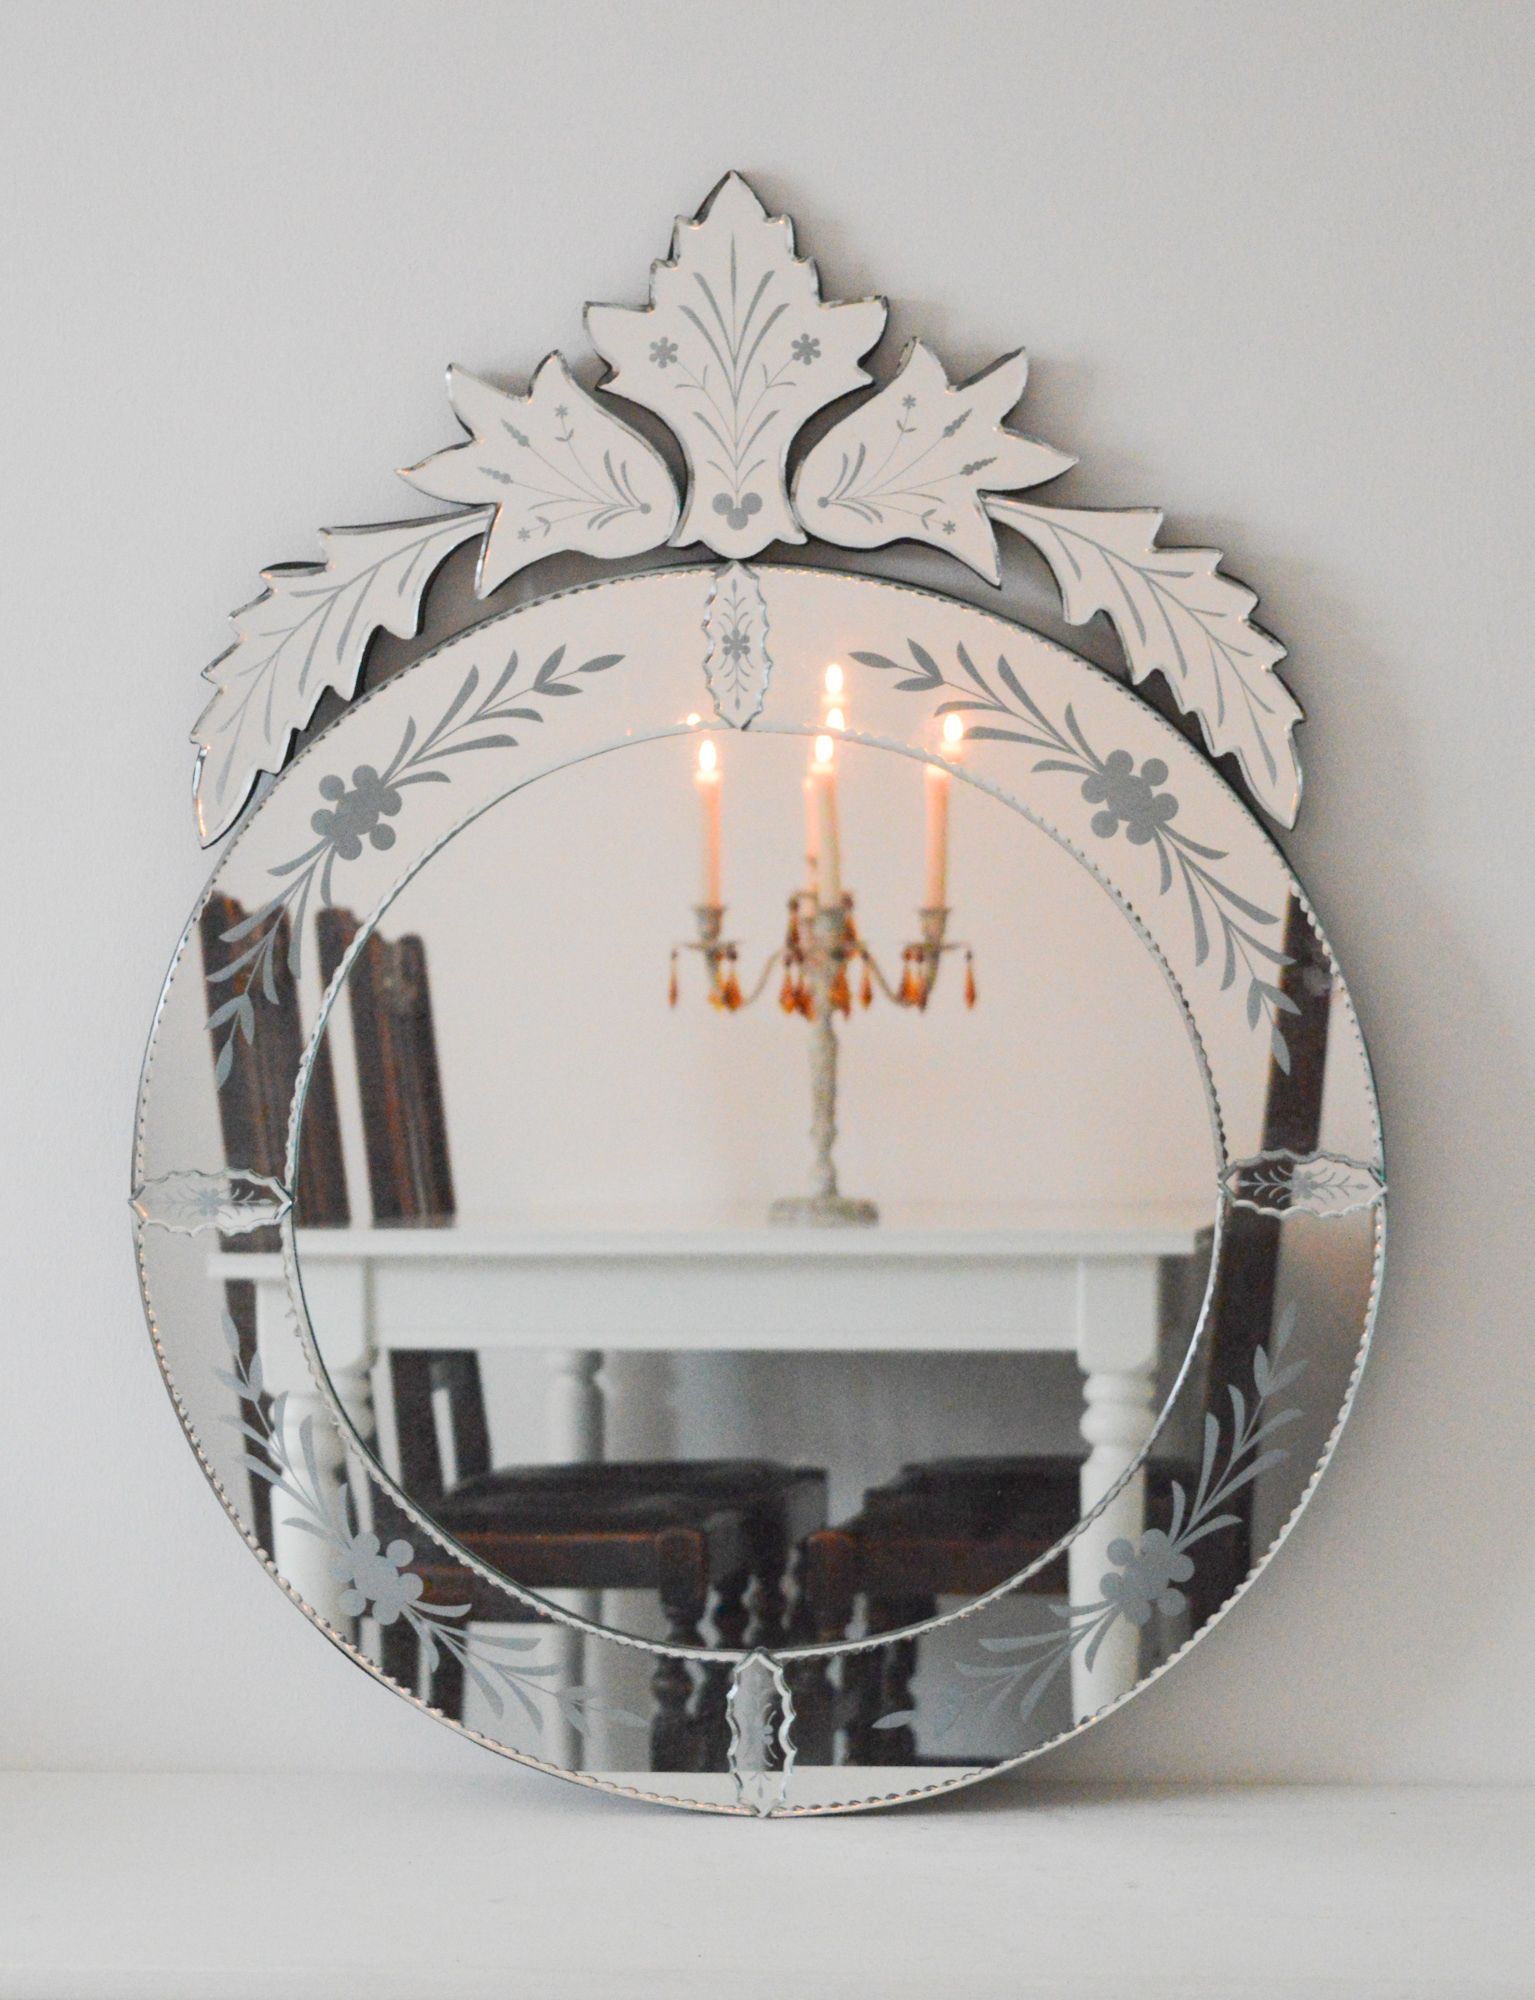 Vintage Venetian Style Wall Mirror, Large Round Decorative Mirror With Regard To Wall Mirrors (View 8 of 15)